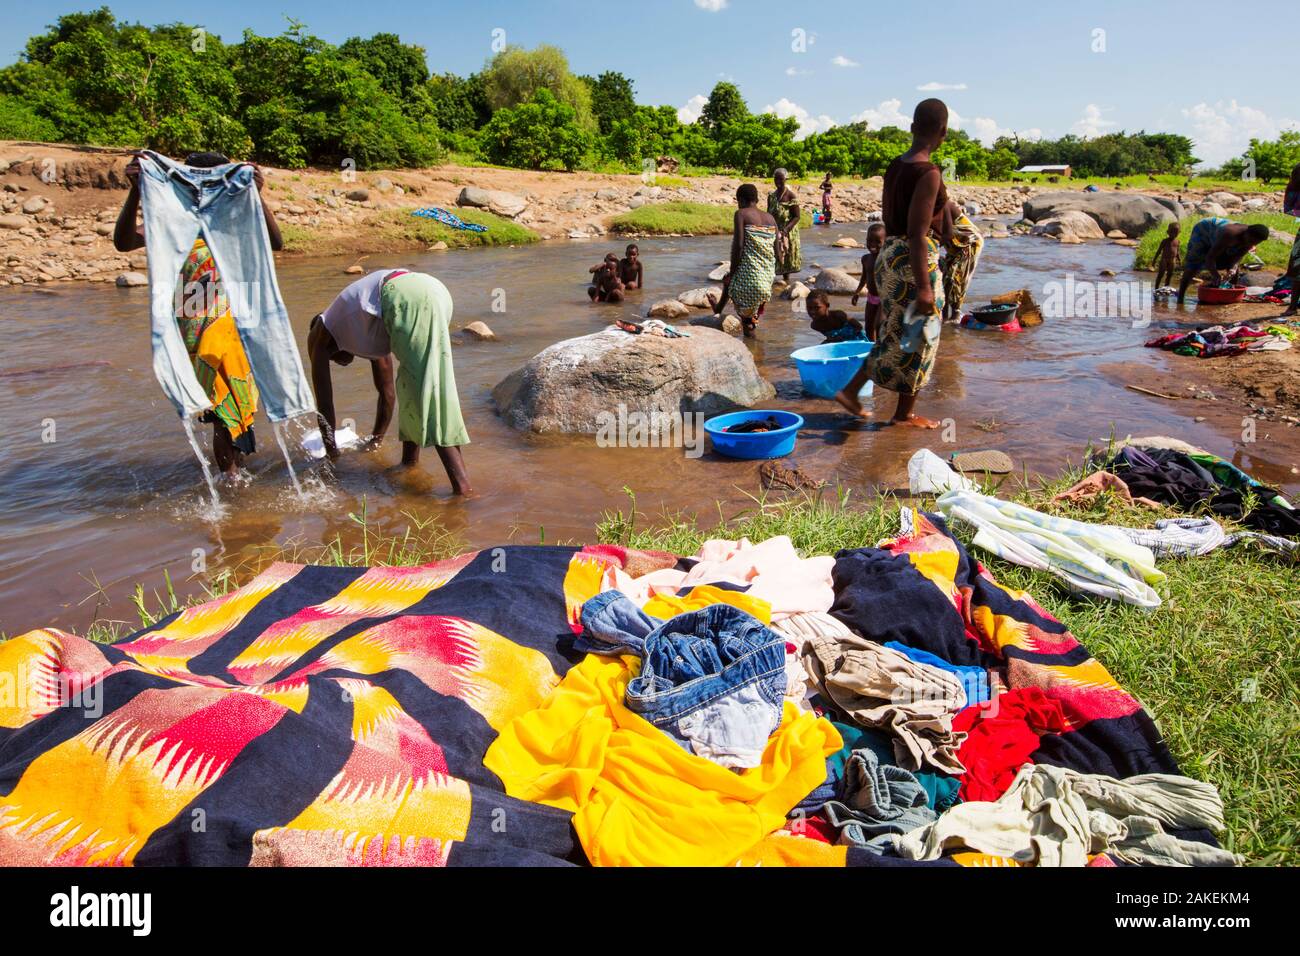 Women washing clothes in a river near Chikwawa in the Shire Valley, Malawi. Stock Photo